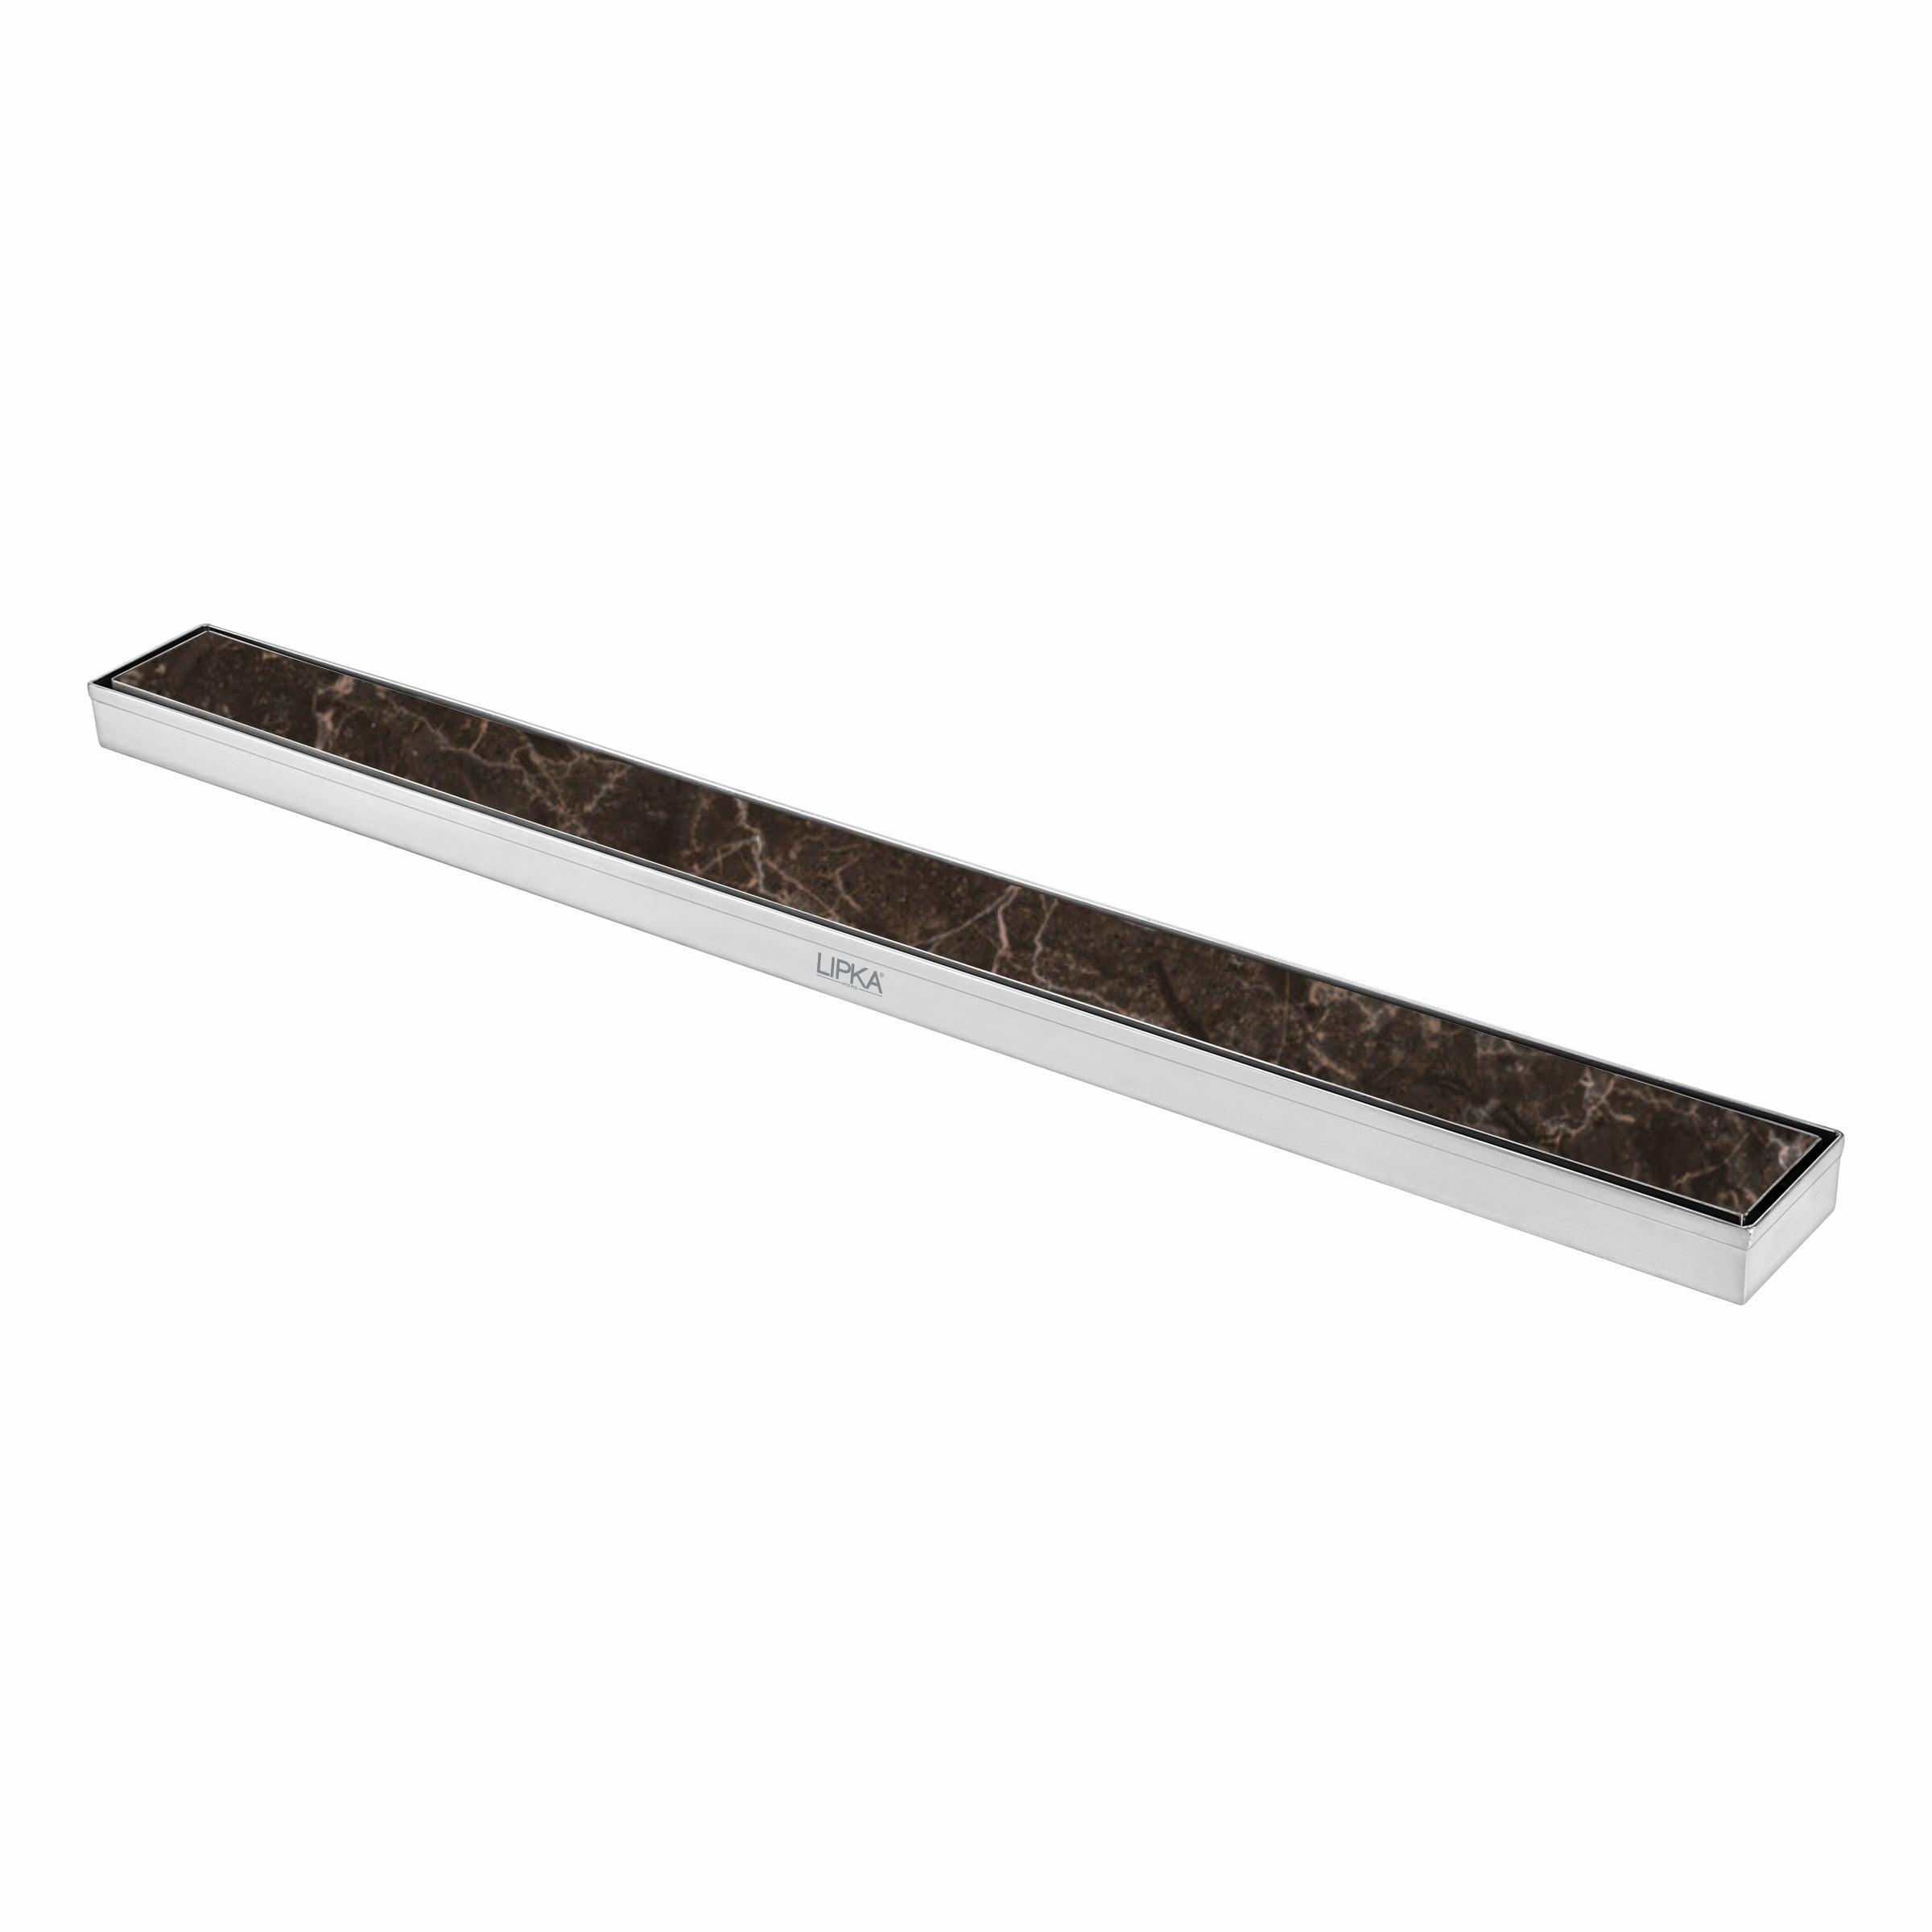 Marble Insert Shower Drain Channel (36 x 2 Inches)